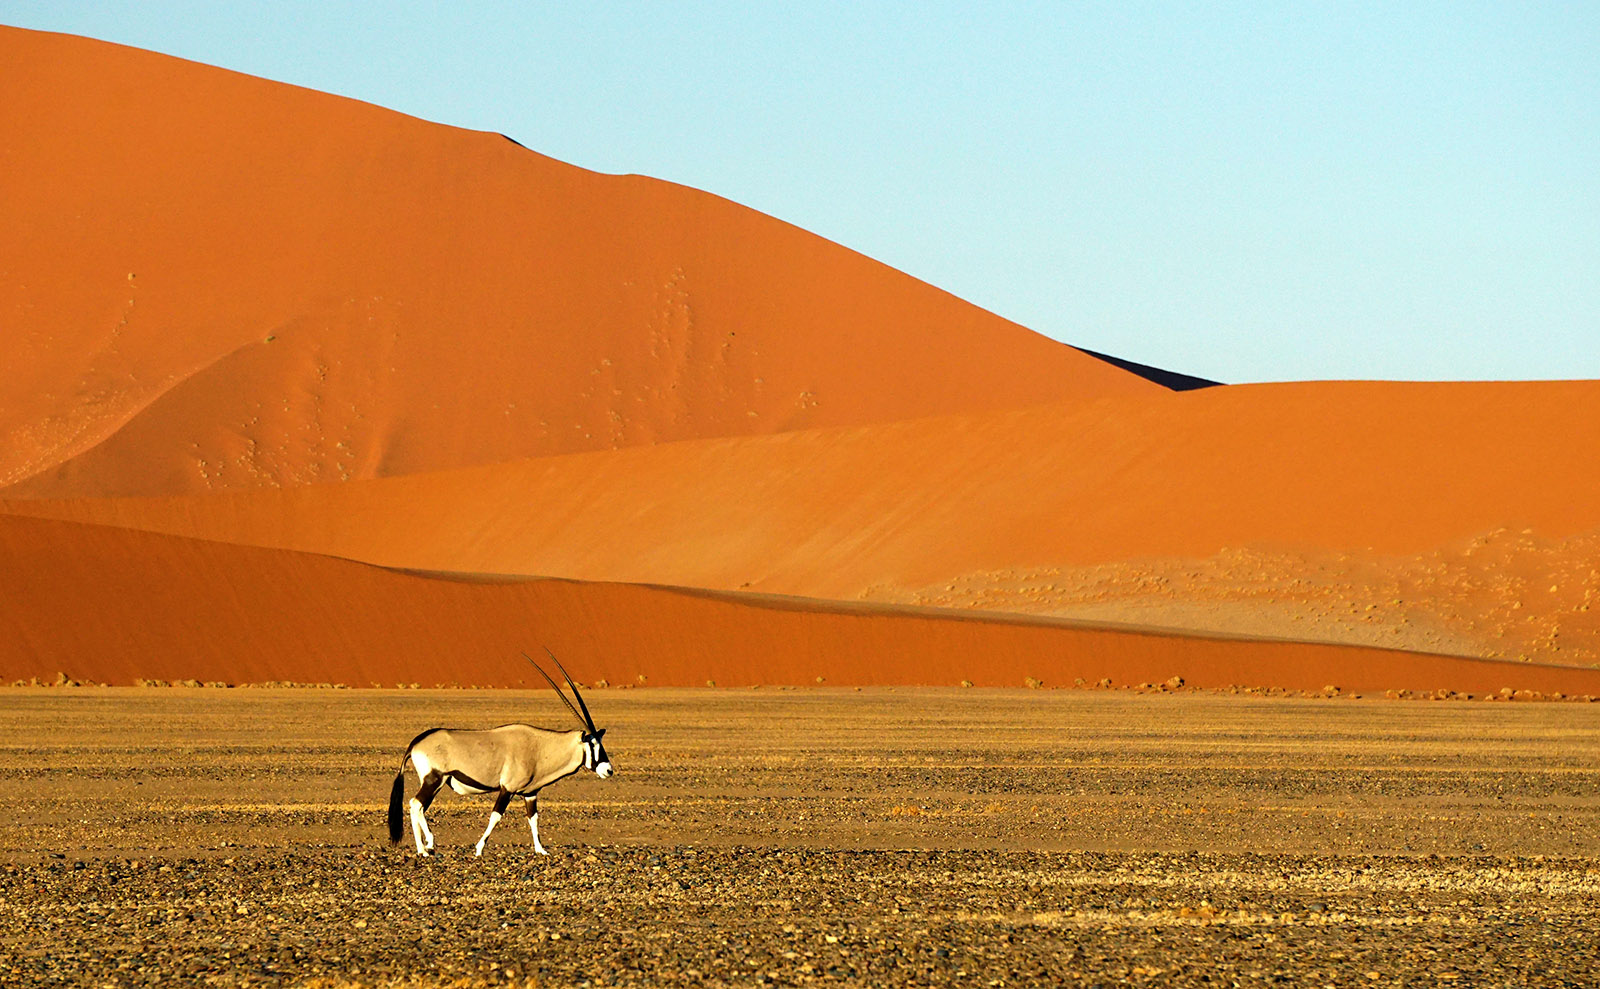 bright blue sky and bright red-orange sand with an antelope walking across the desert